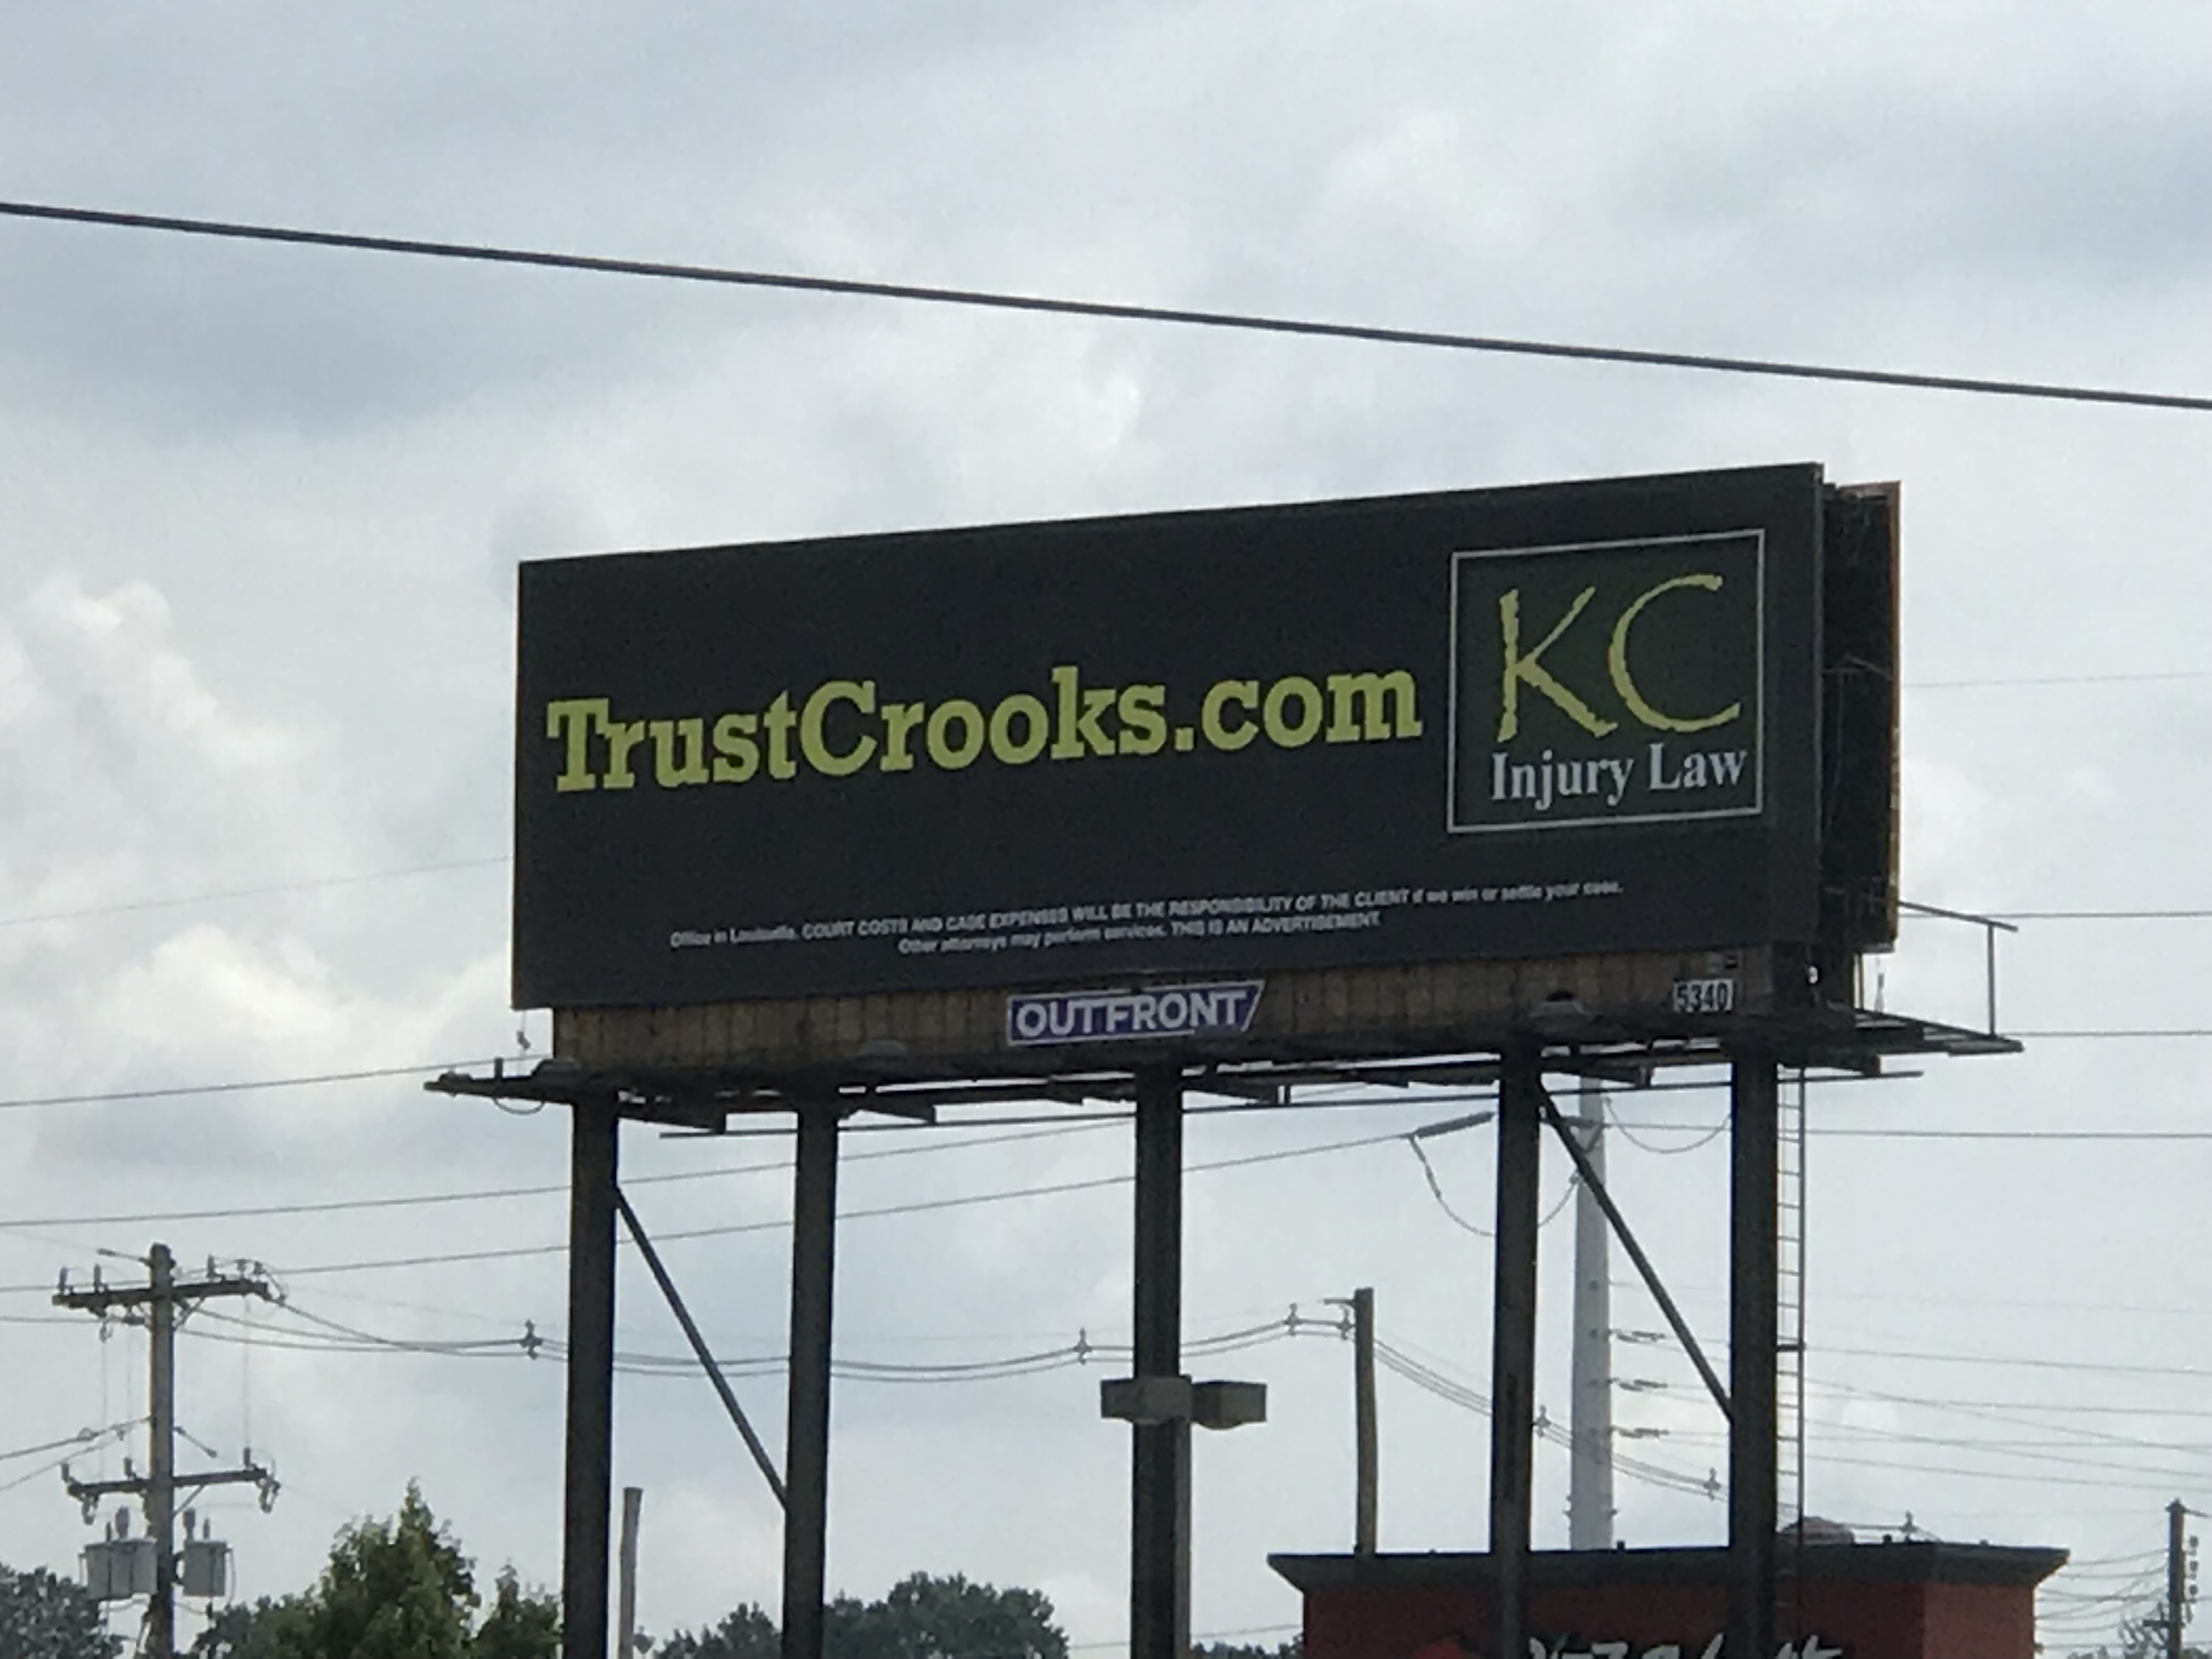 Local lawyers’ billboard.  Photo taken by and the property of FourWalls.